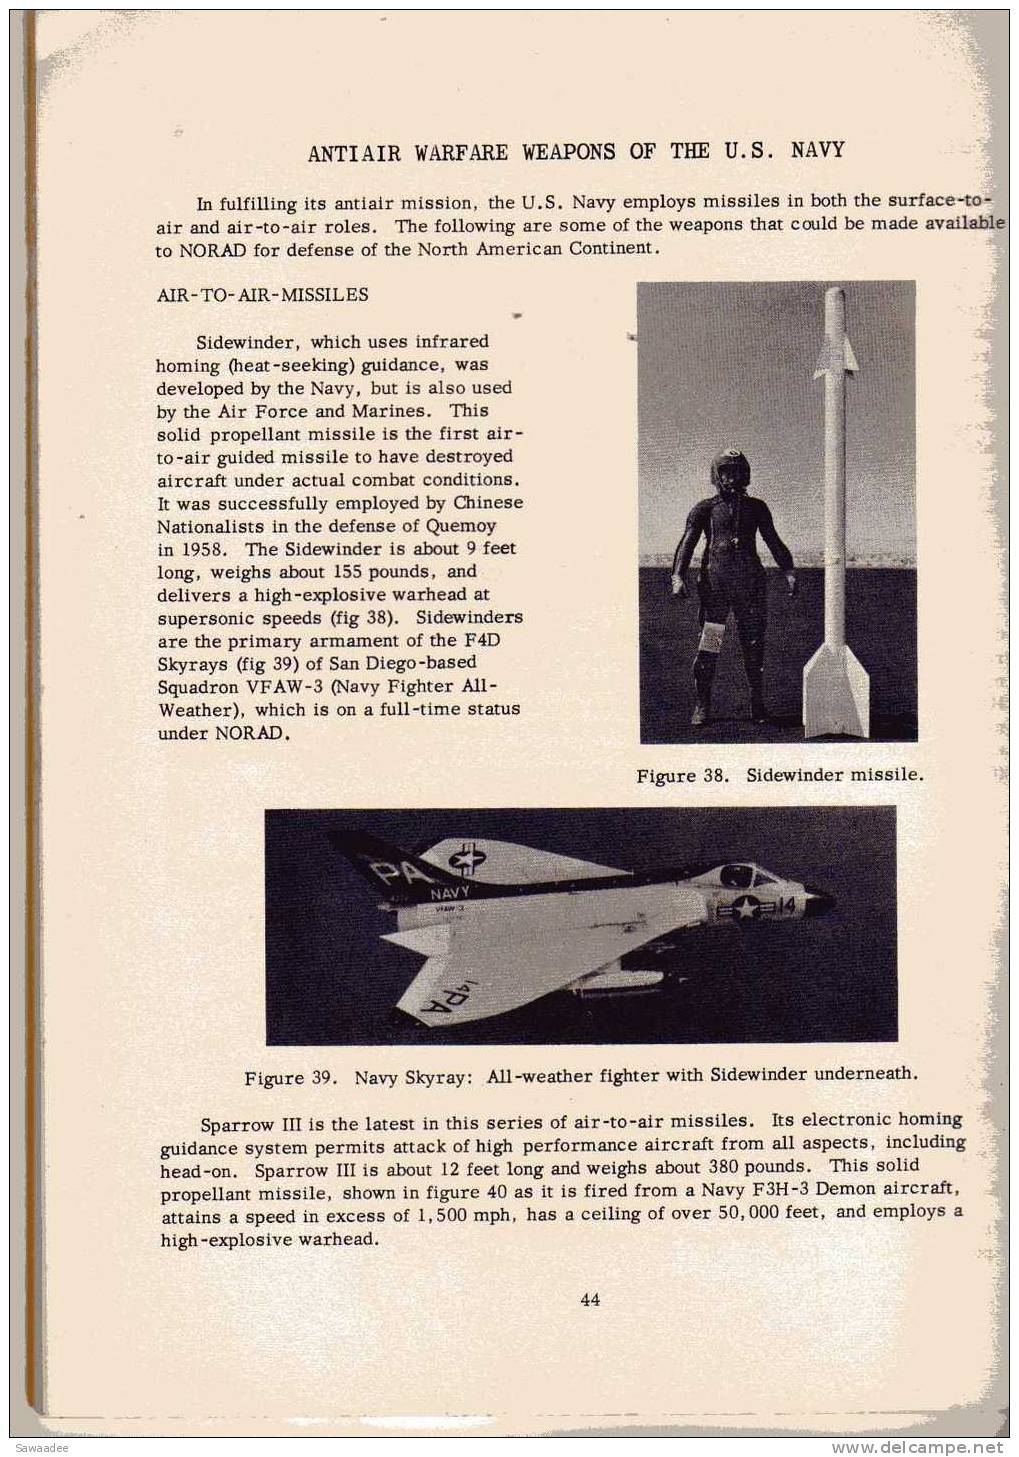 DOCUMENT - MILITARIA  - U.S. ARMY AIR DEFENSE -  FORT BLISS - TEXAS - 1962/63 - 78 PAGES - NBRES ILLUSTRATIONS, PHOTOS - Guerras Implicadas US